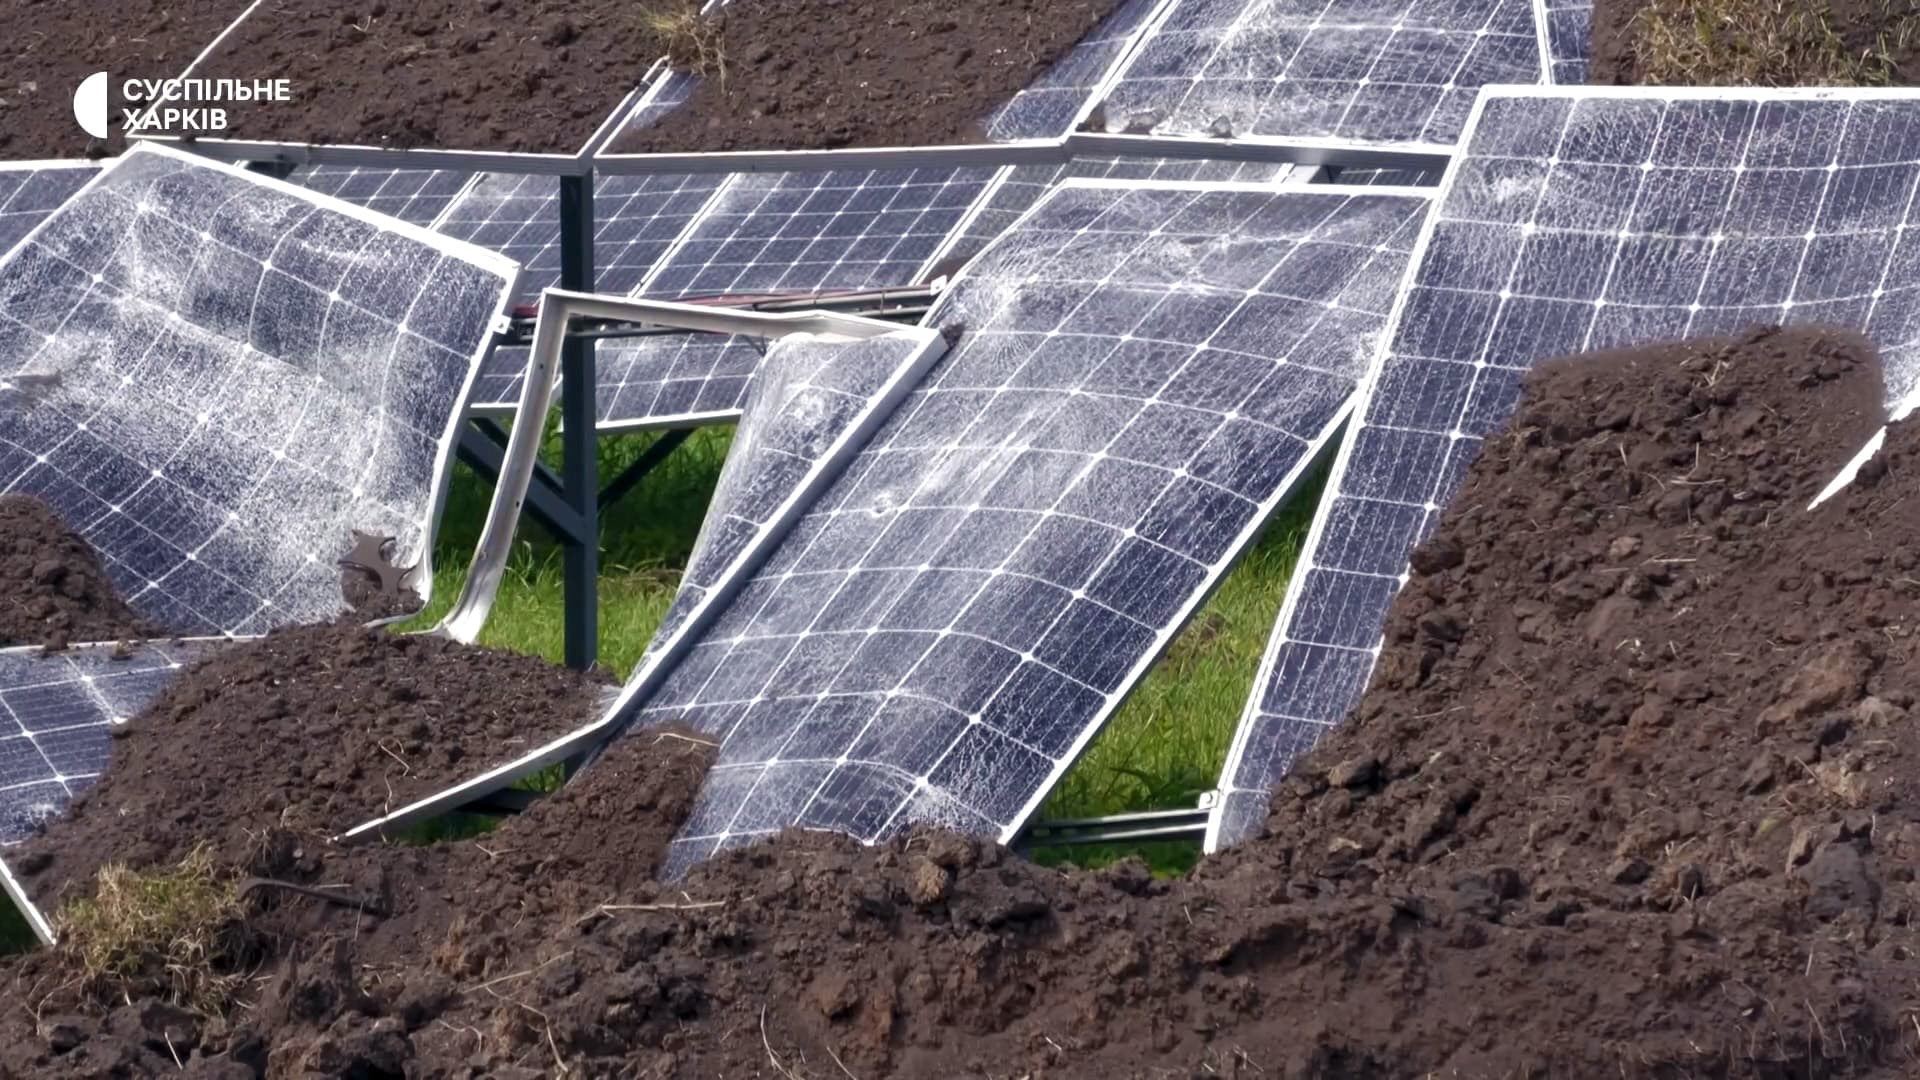 solar power plant is completely out of order